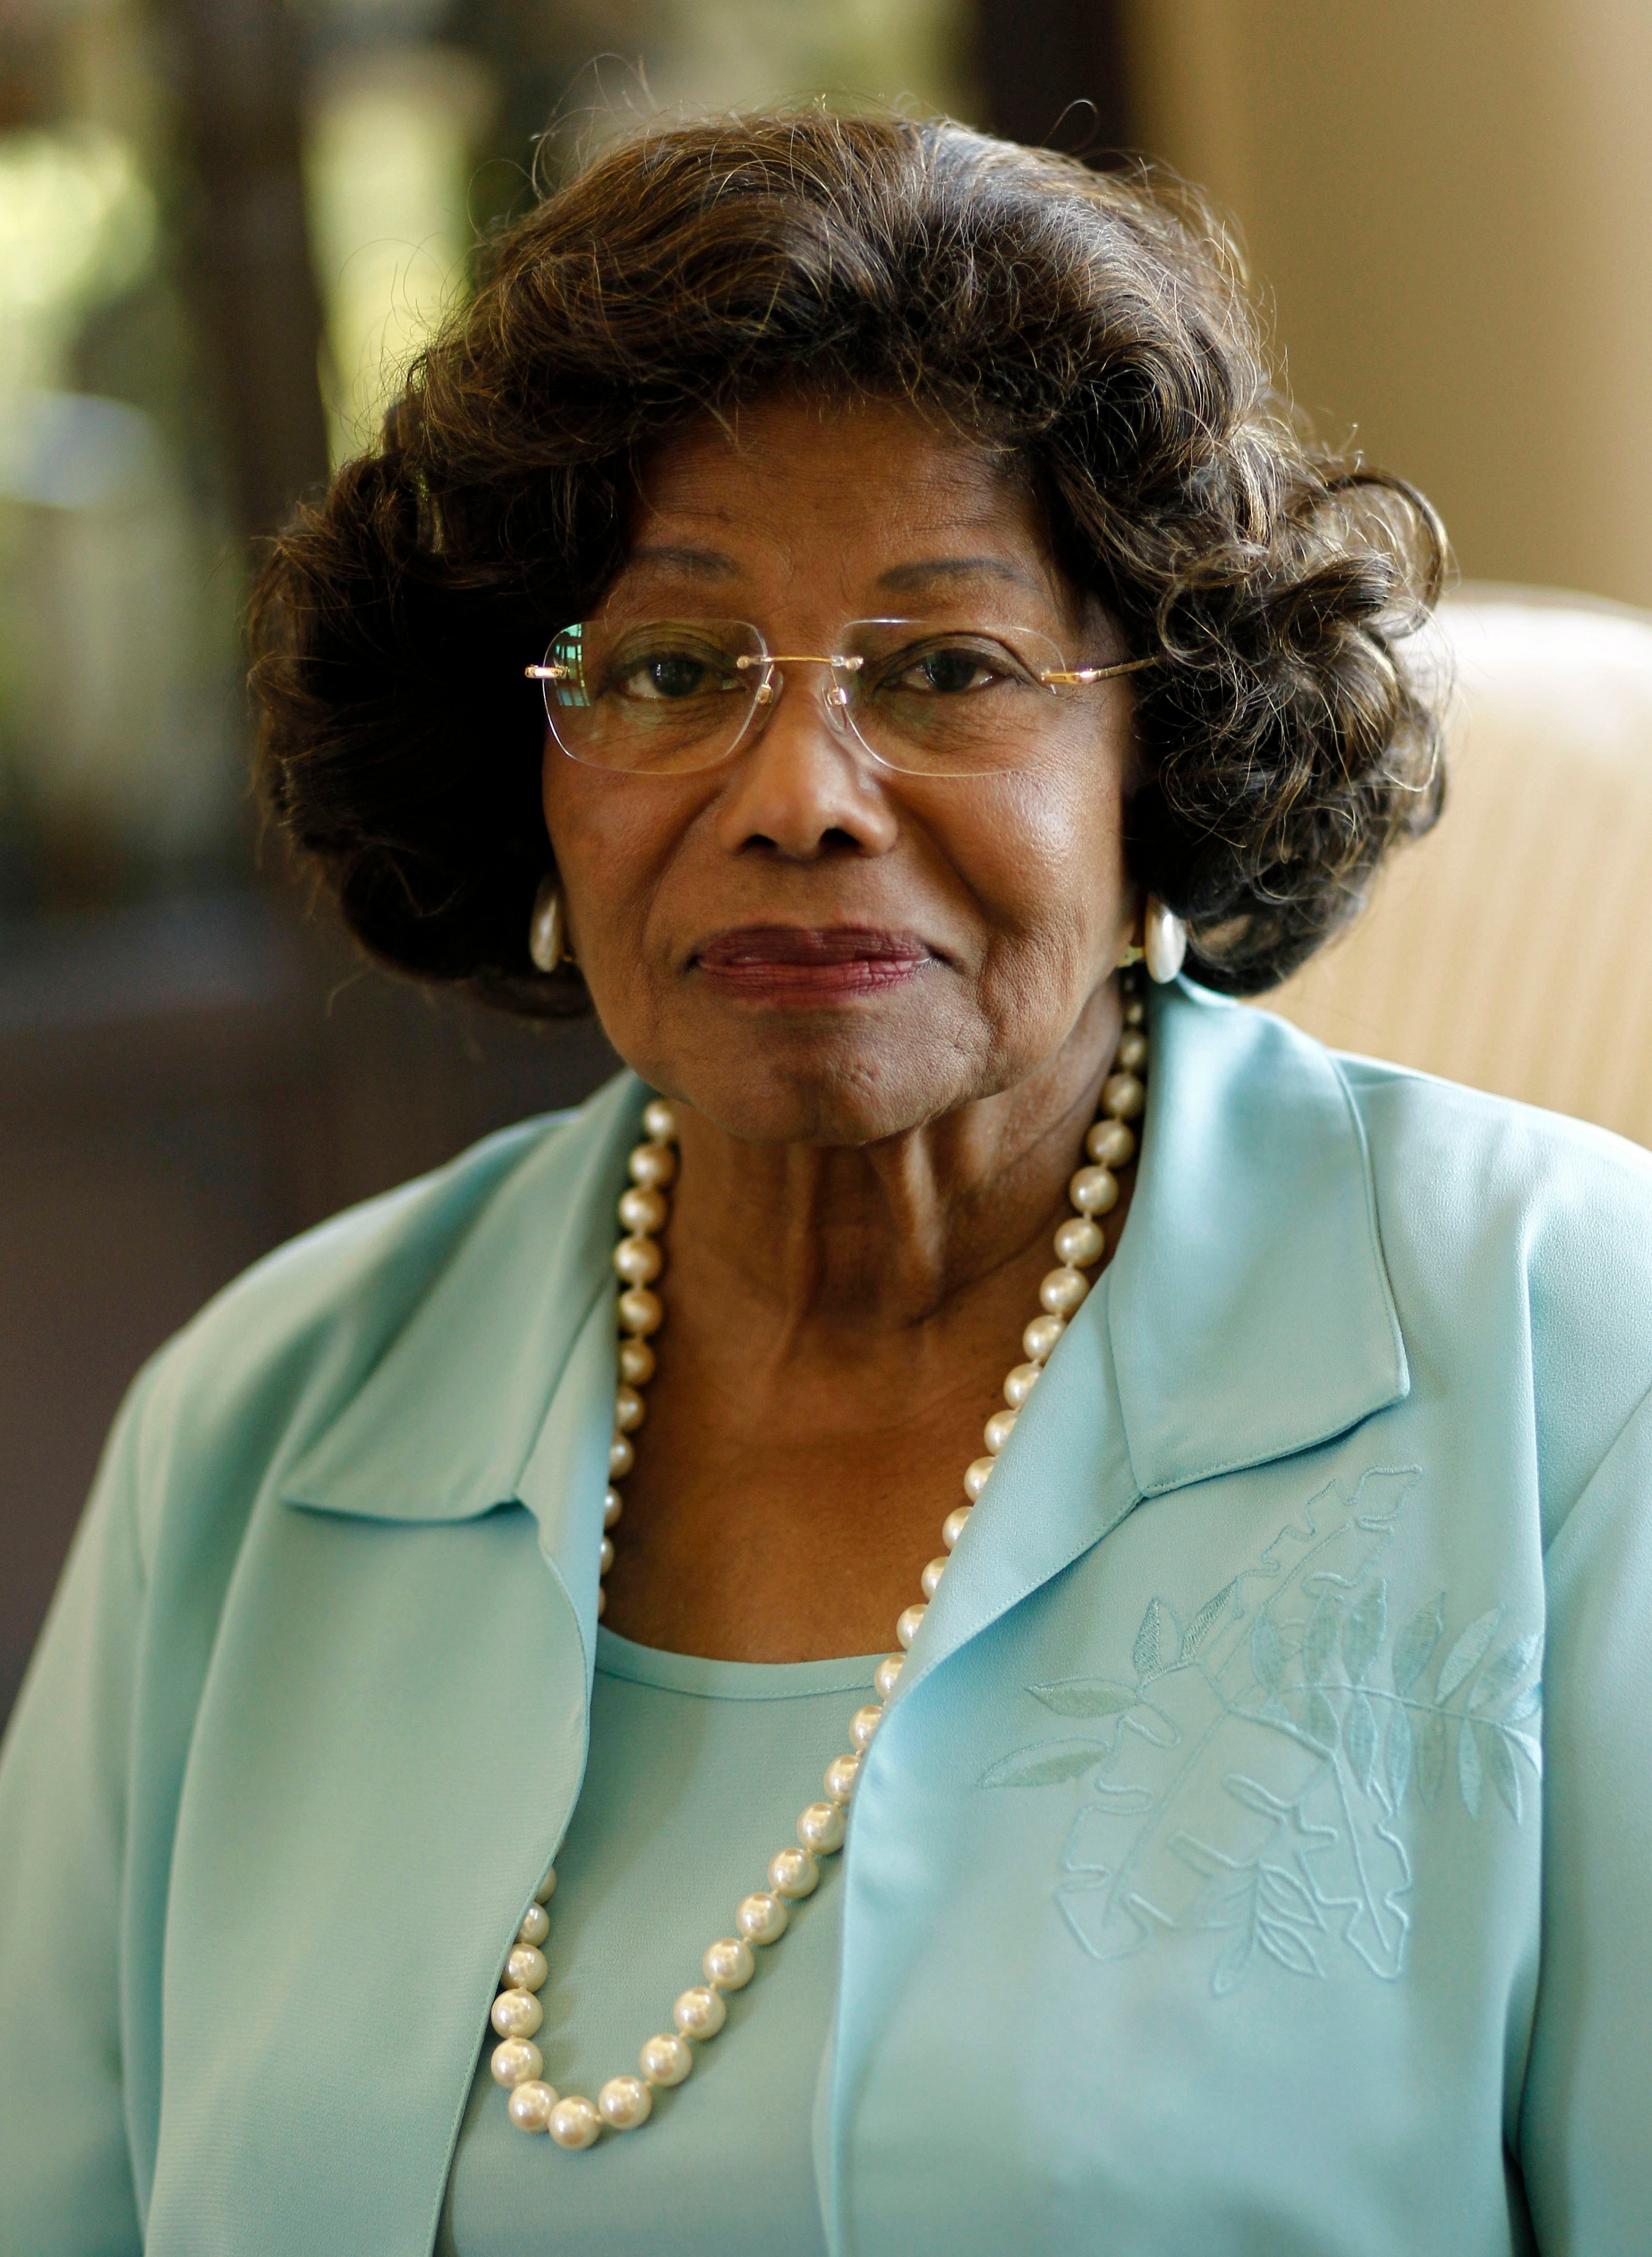 Michael Jackson’s mother Katherine Jackson has been embroiled in legal dispute after legal dispute since his death. Photo: AP